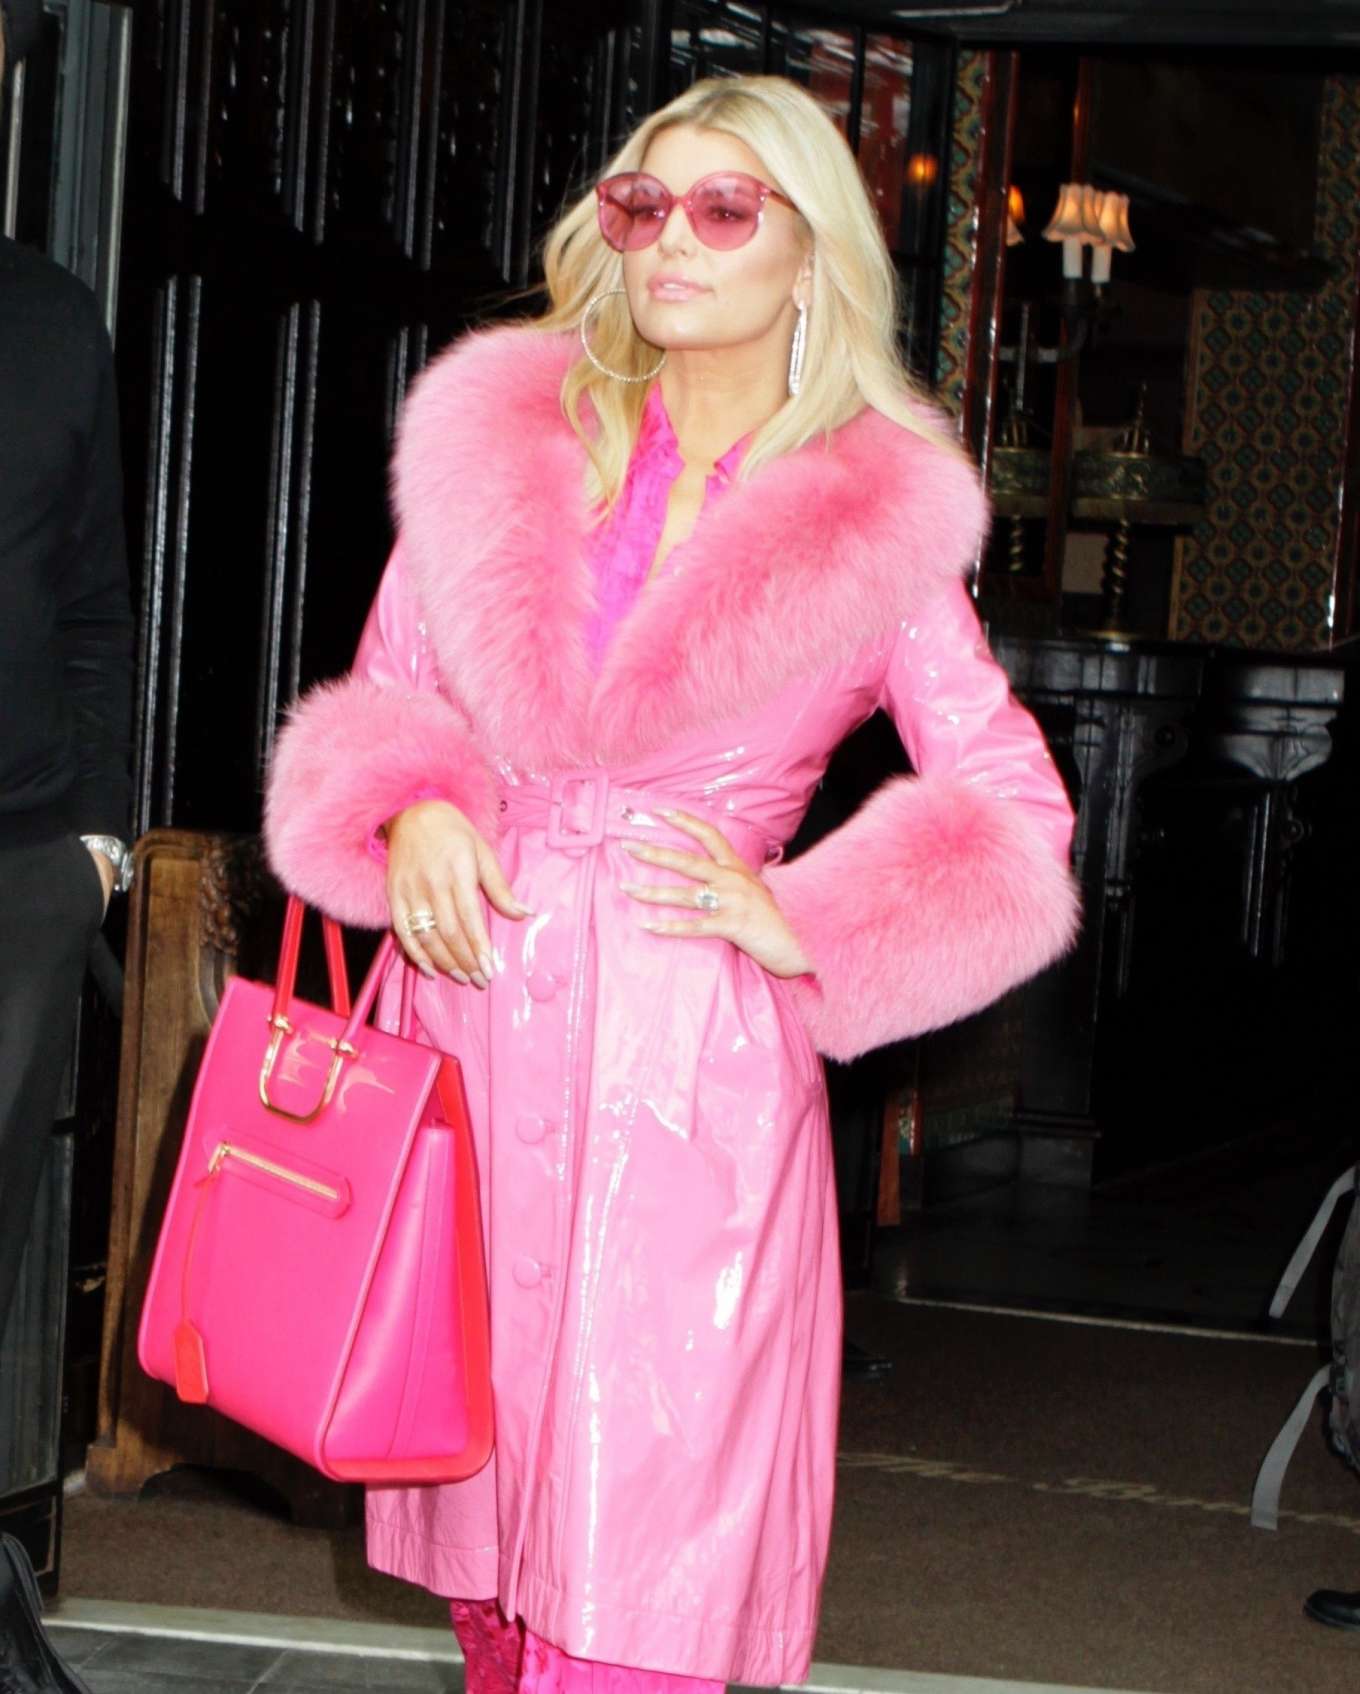 Jessica Simpson in Pink Outfit at BuzzFeed in New York-04 | GotCeleb